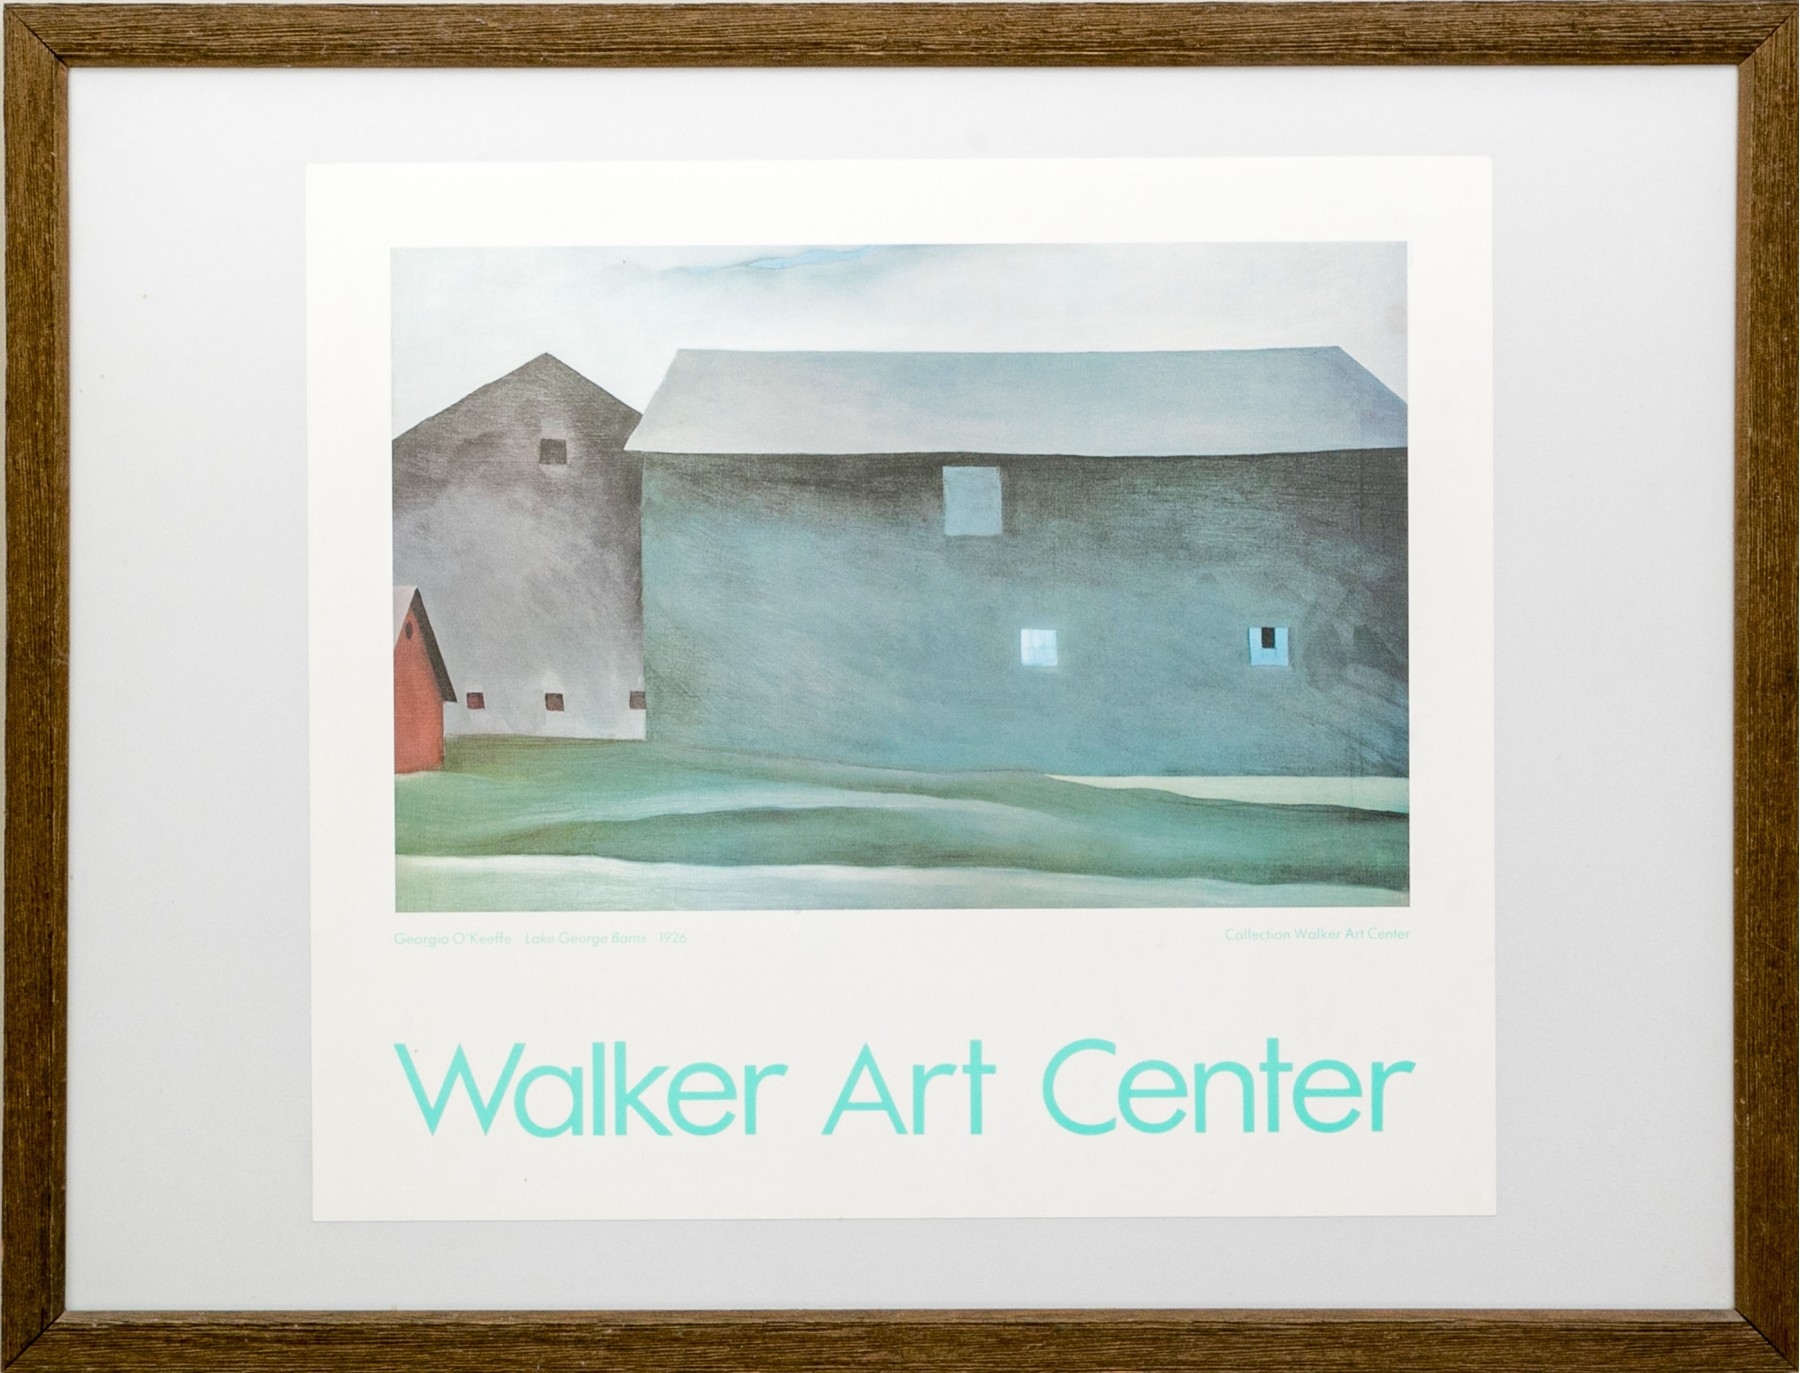 Decorative Walker Arts Center Poster With Print Of Georgia O'Keefe Painting - Georgia O'Keeffe